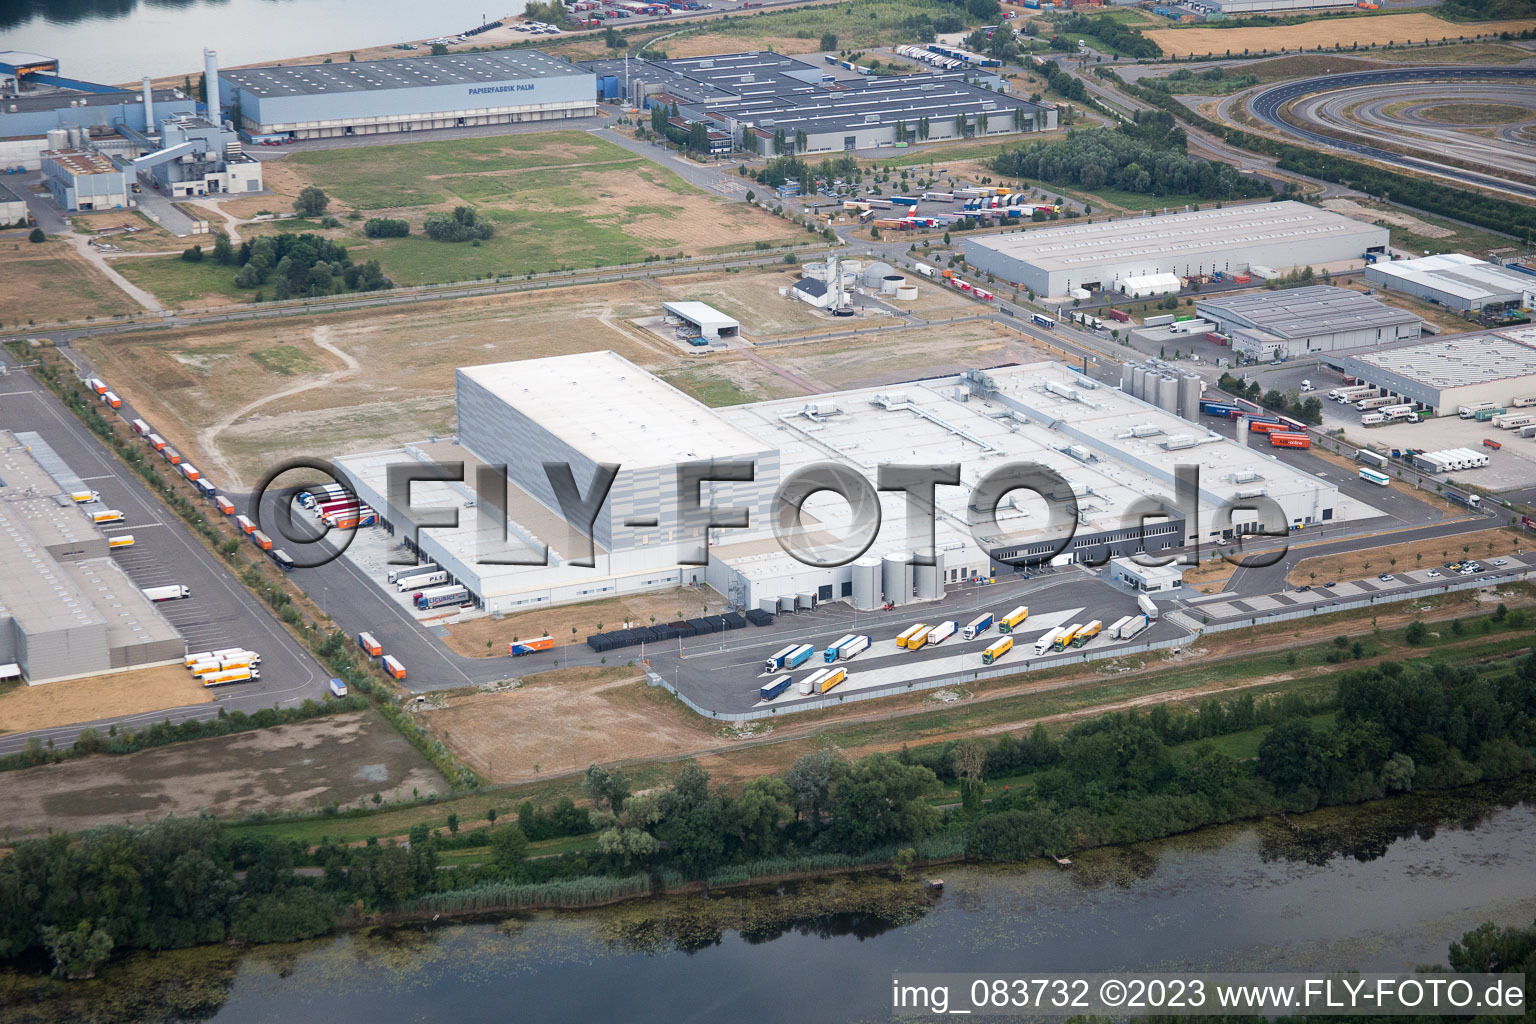 Oberwald industrial area in Wörth am Rhein in the state Rhineland-Palatinate, Germany seen from above